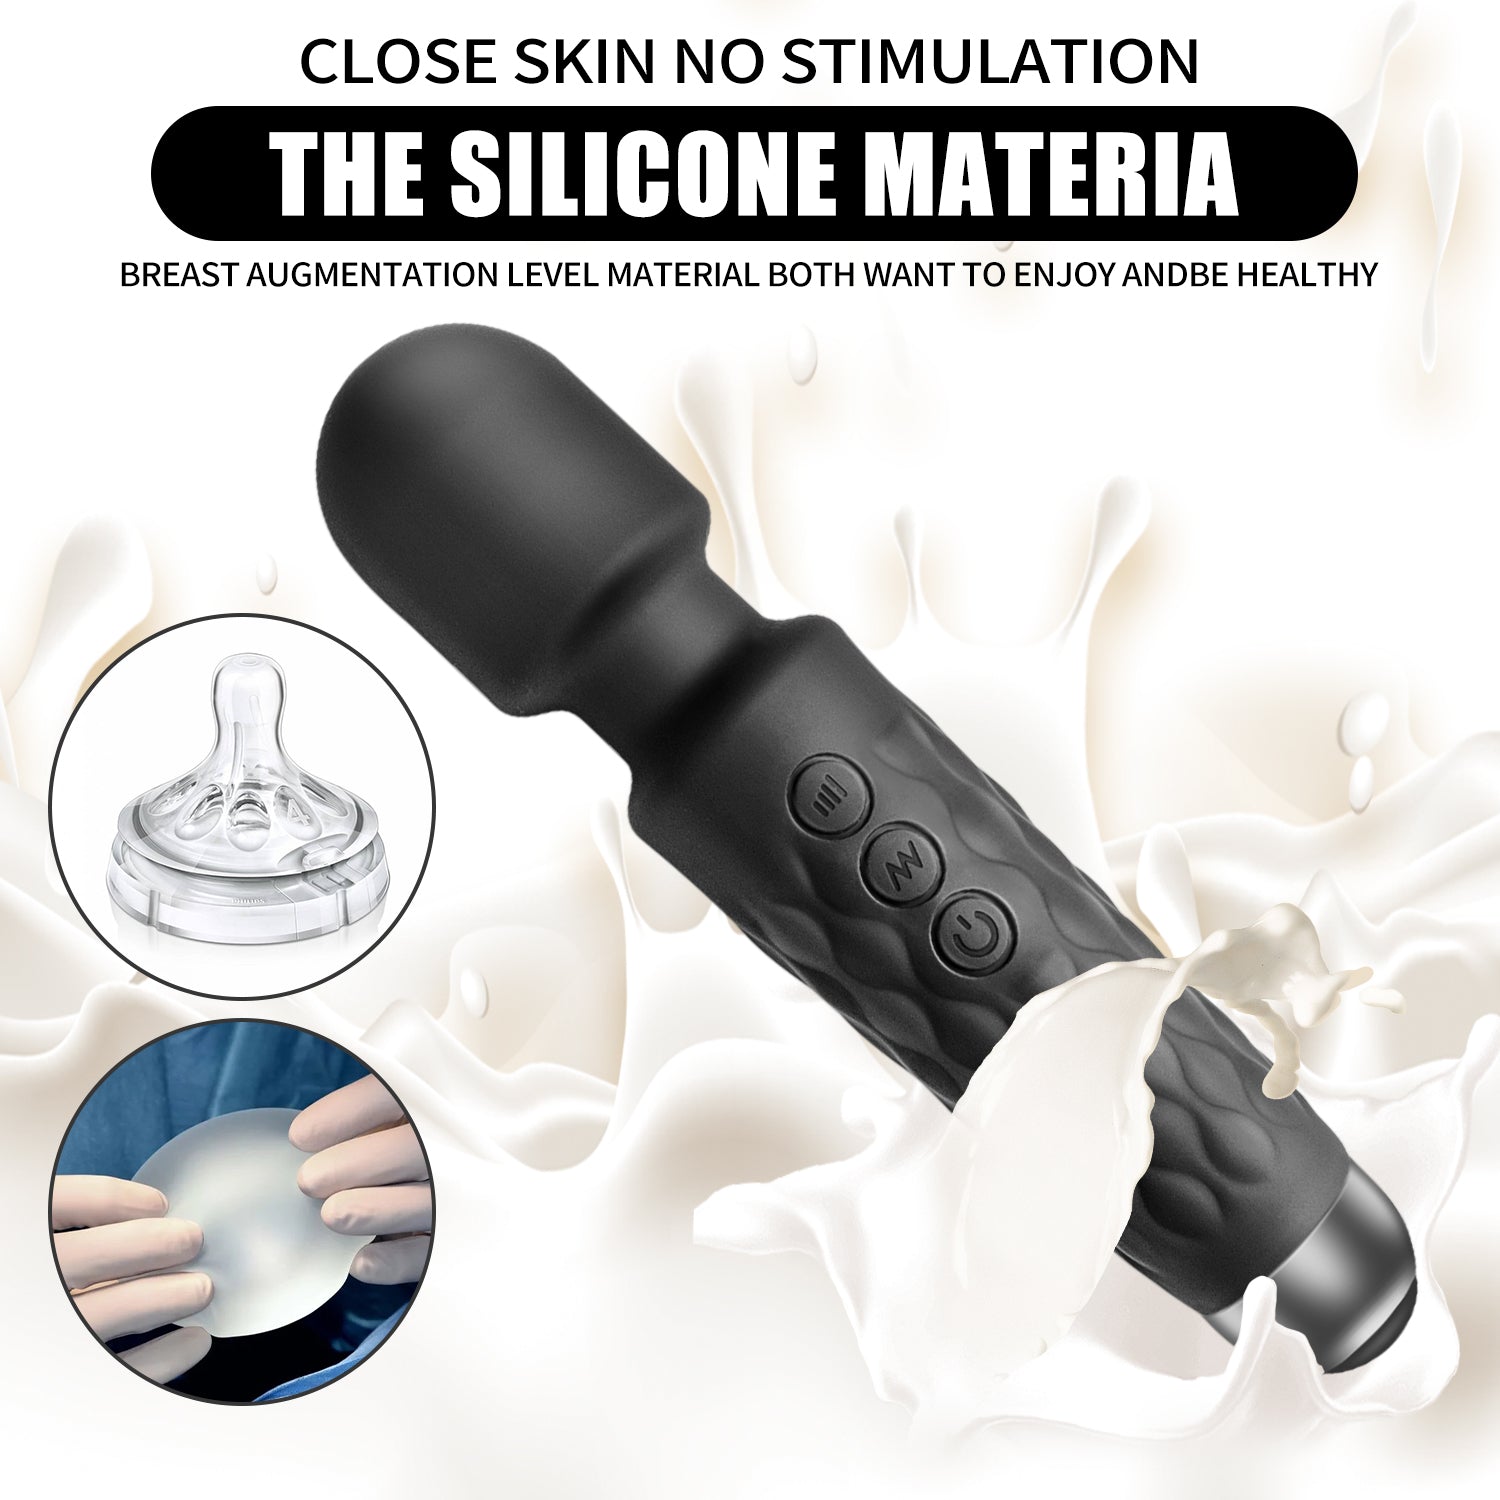 Silicone Wand Vibrator Safety Material